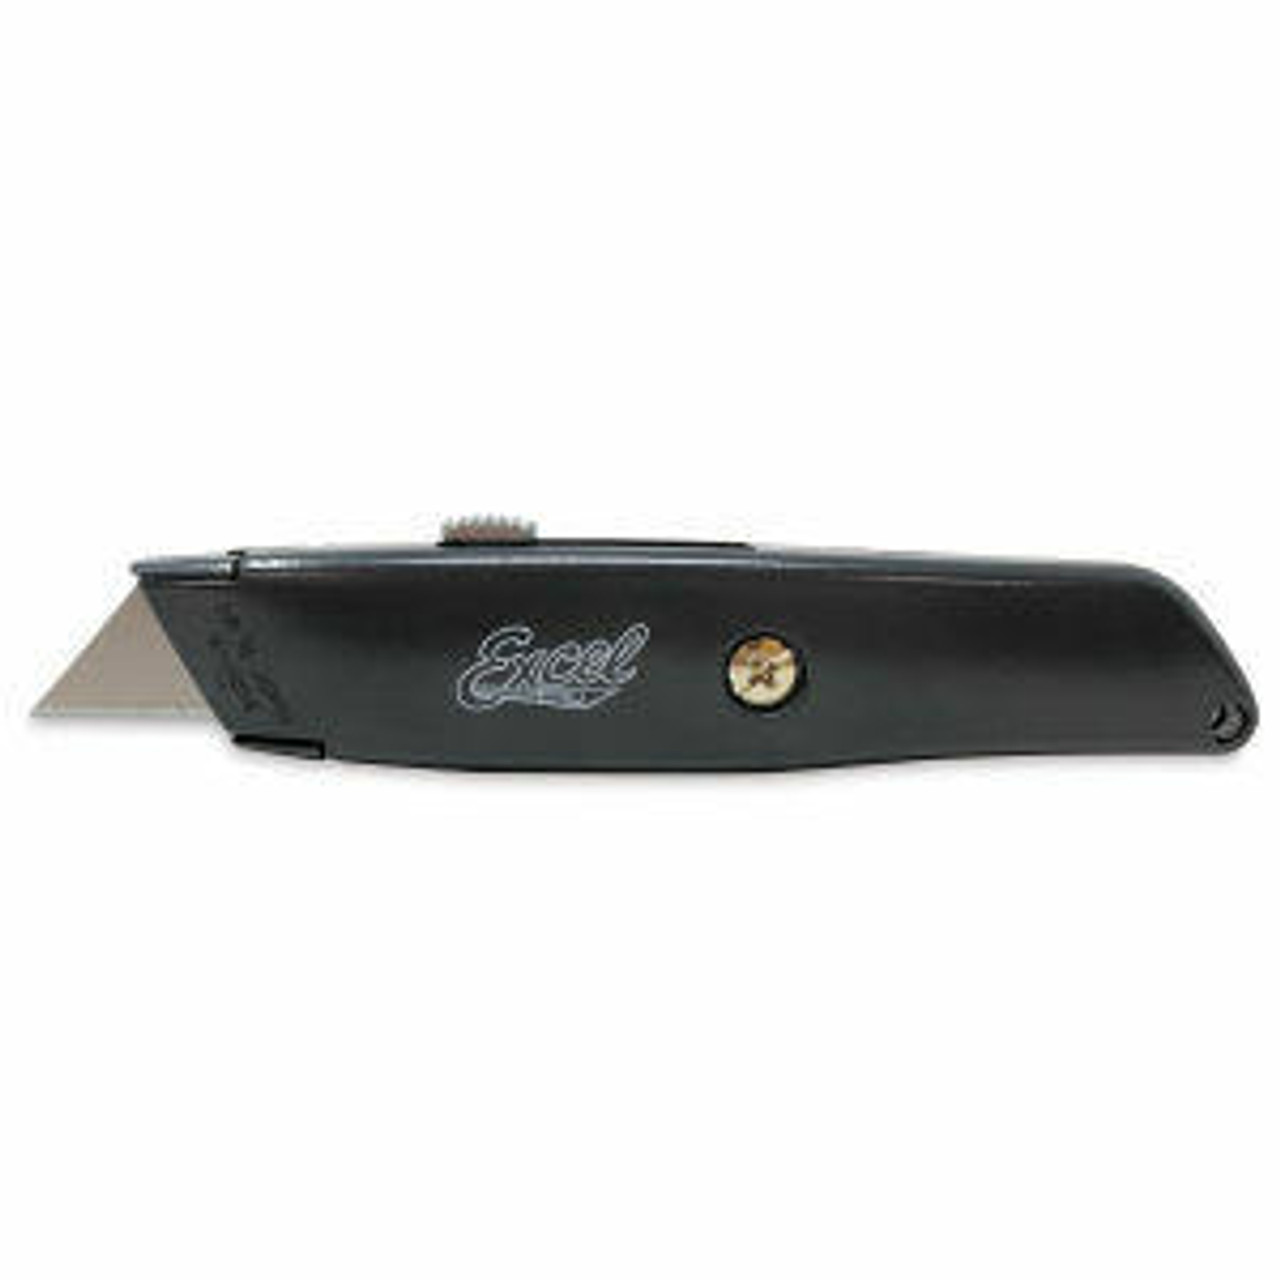 Utility Knife - Molded for Secure, Comfortable Grip, Retractable 3